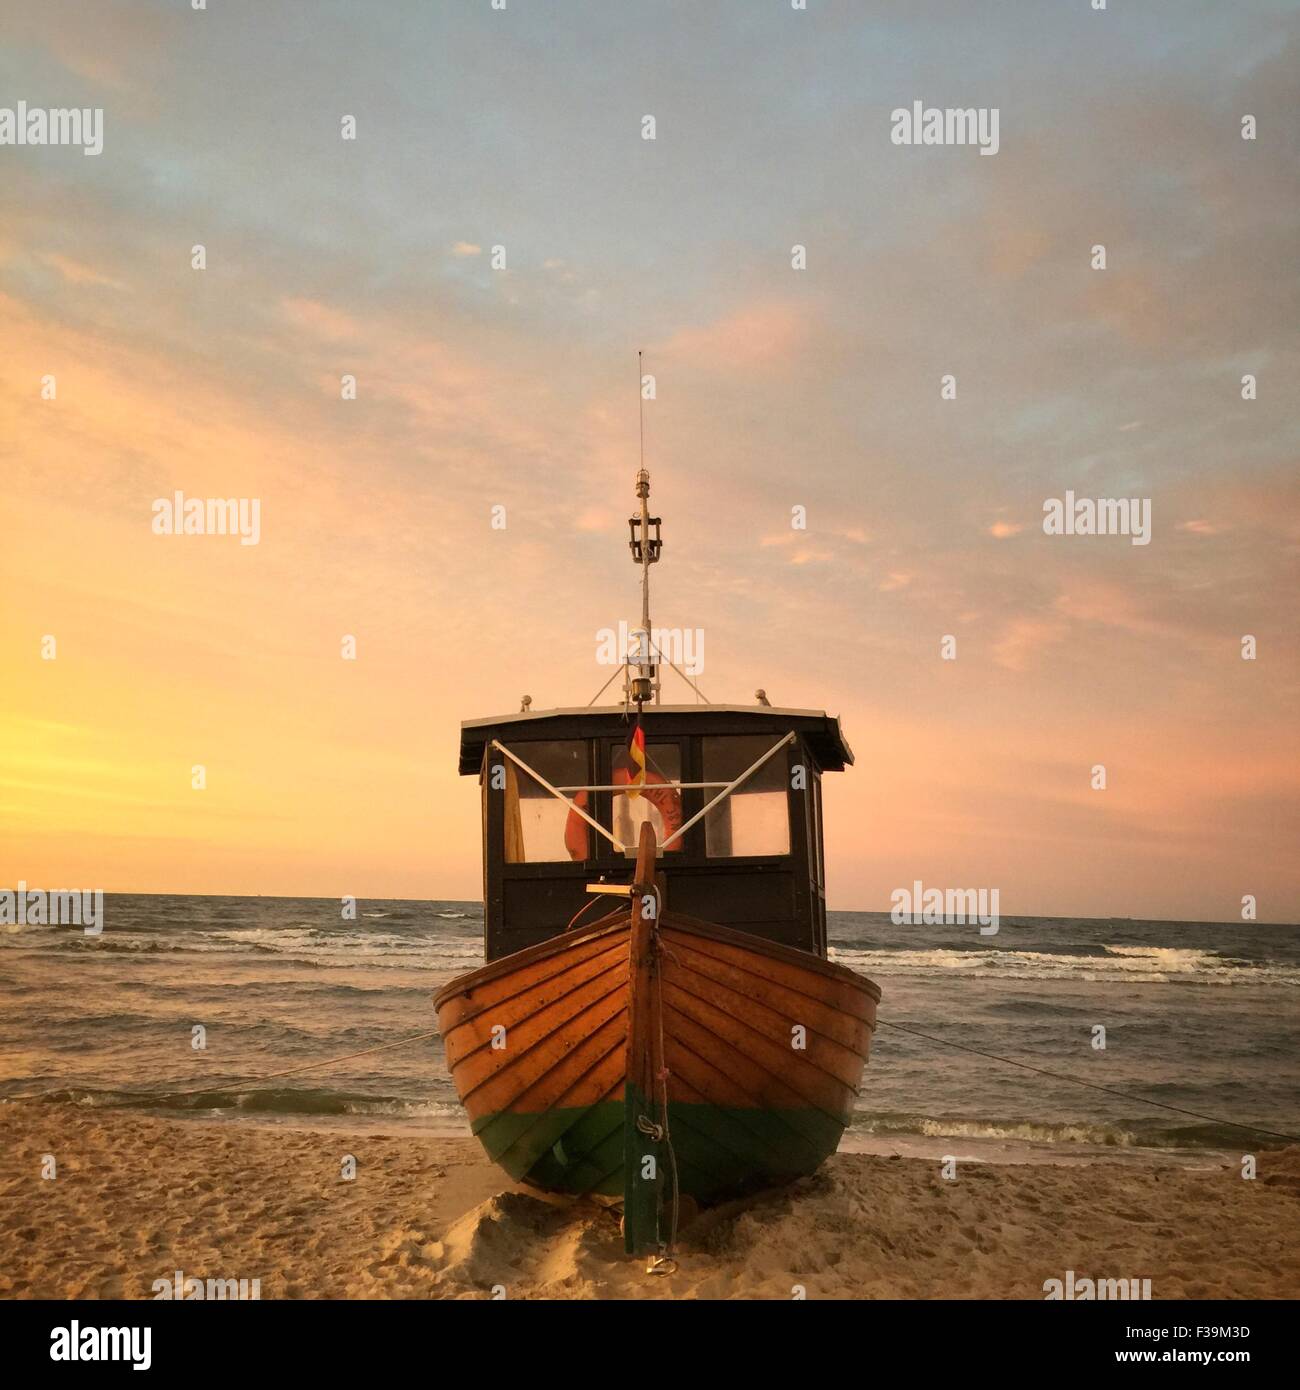 Close-up of a wooden boat on beach, Baltic sea, Germany Stock Photo